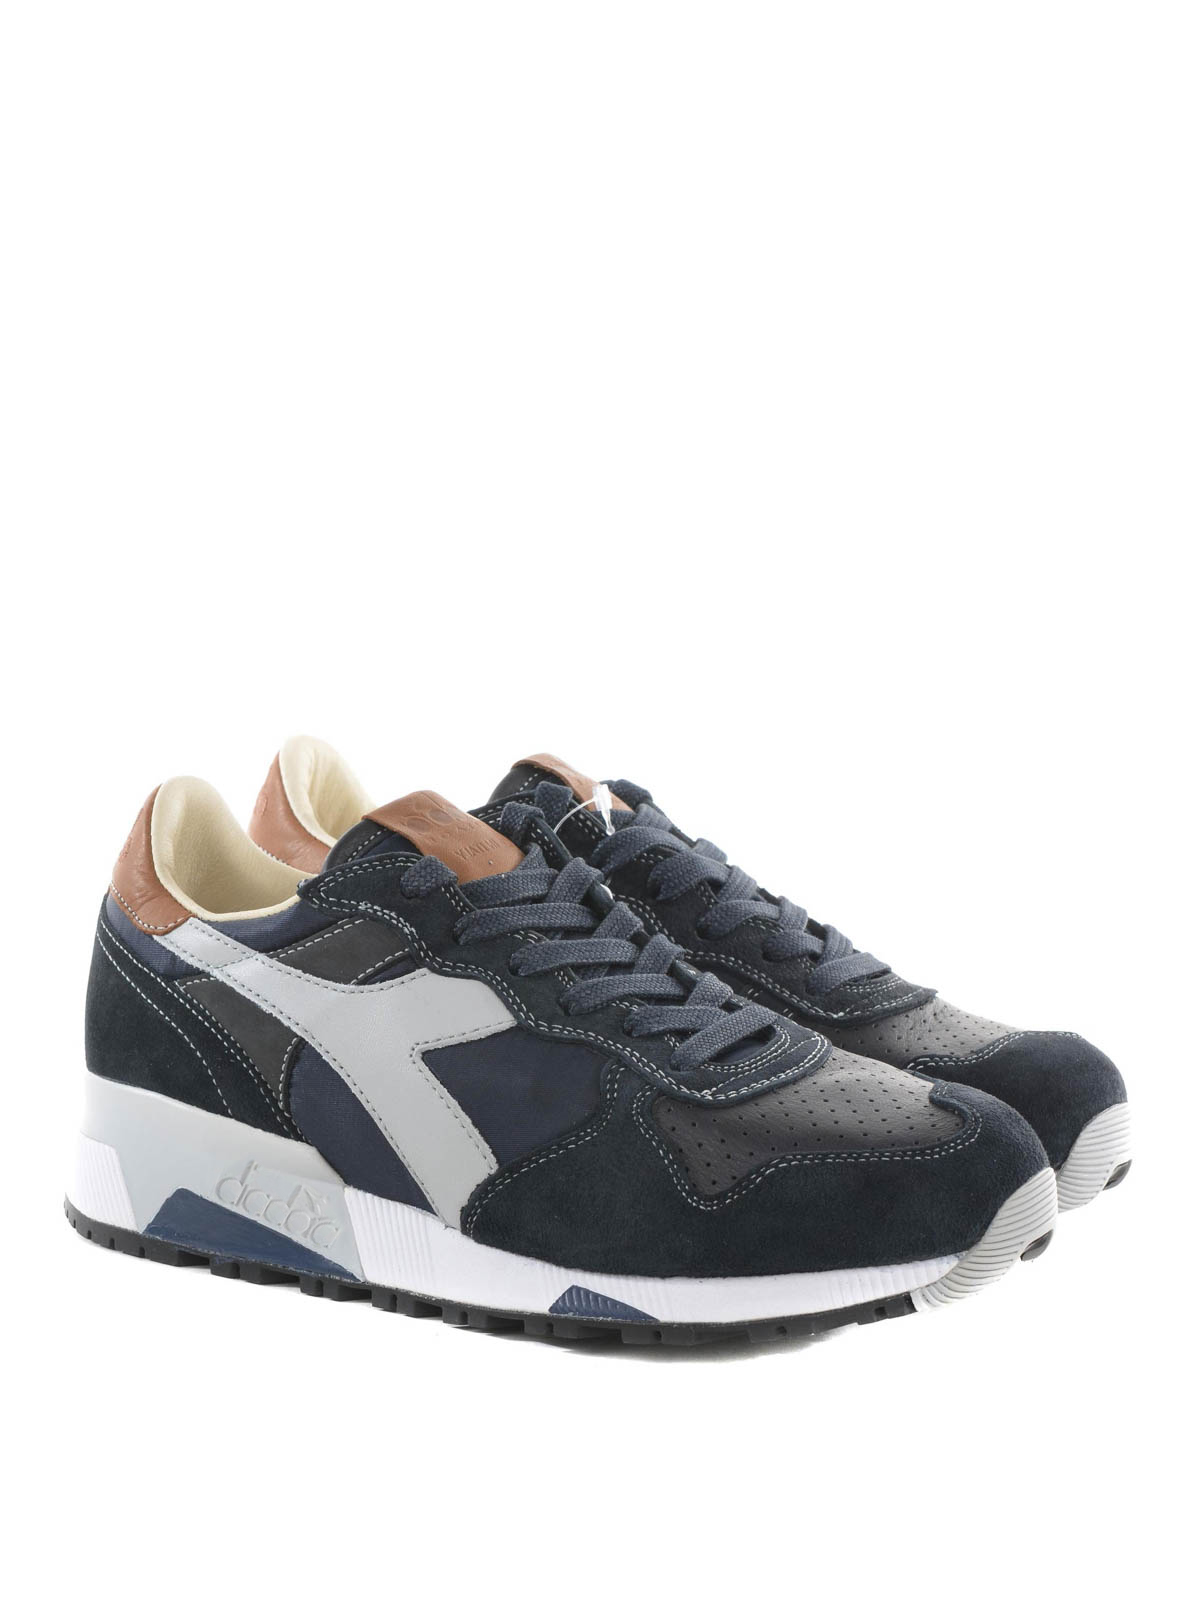 Trainers Diadora Heritage - Trident 90 Nyl sneakers - 16130360117